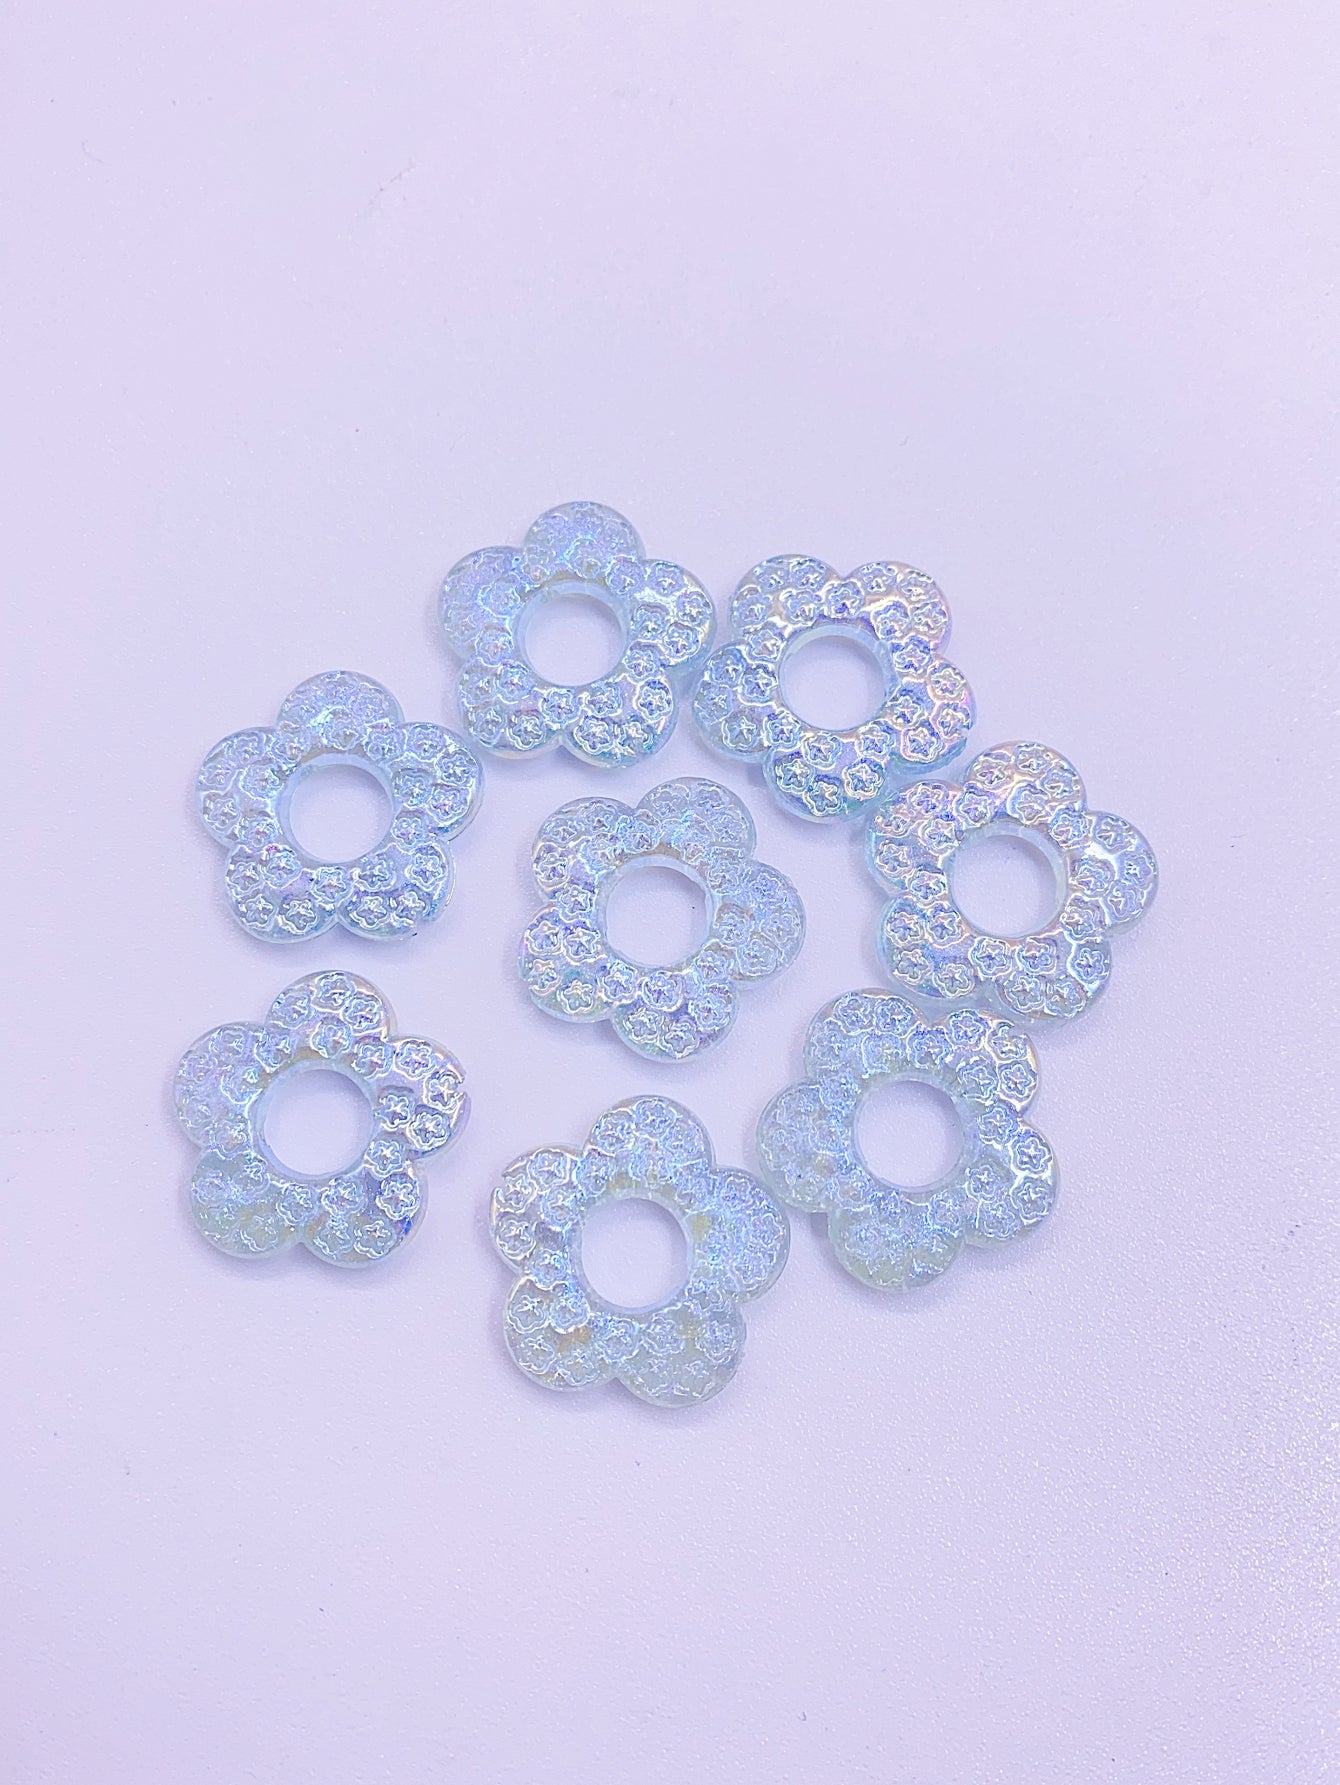 New mermaid five-petal flower large petals straight hole flower accessories diy clothing jewelry accessories patch flowers